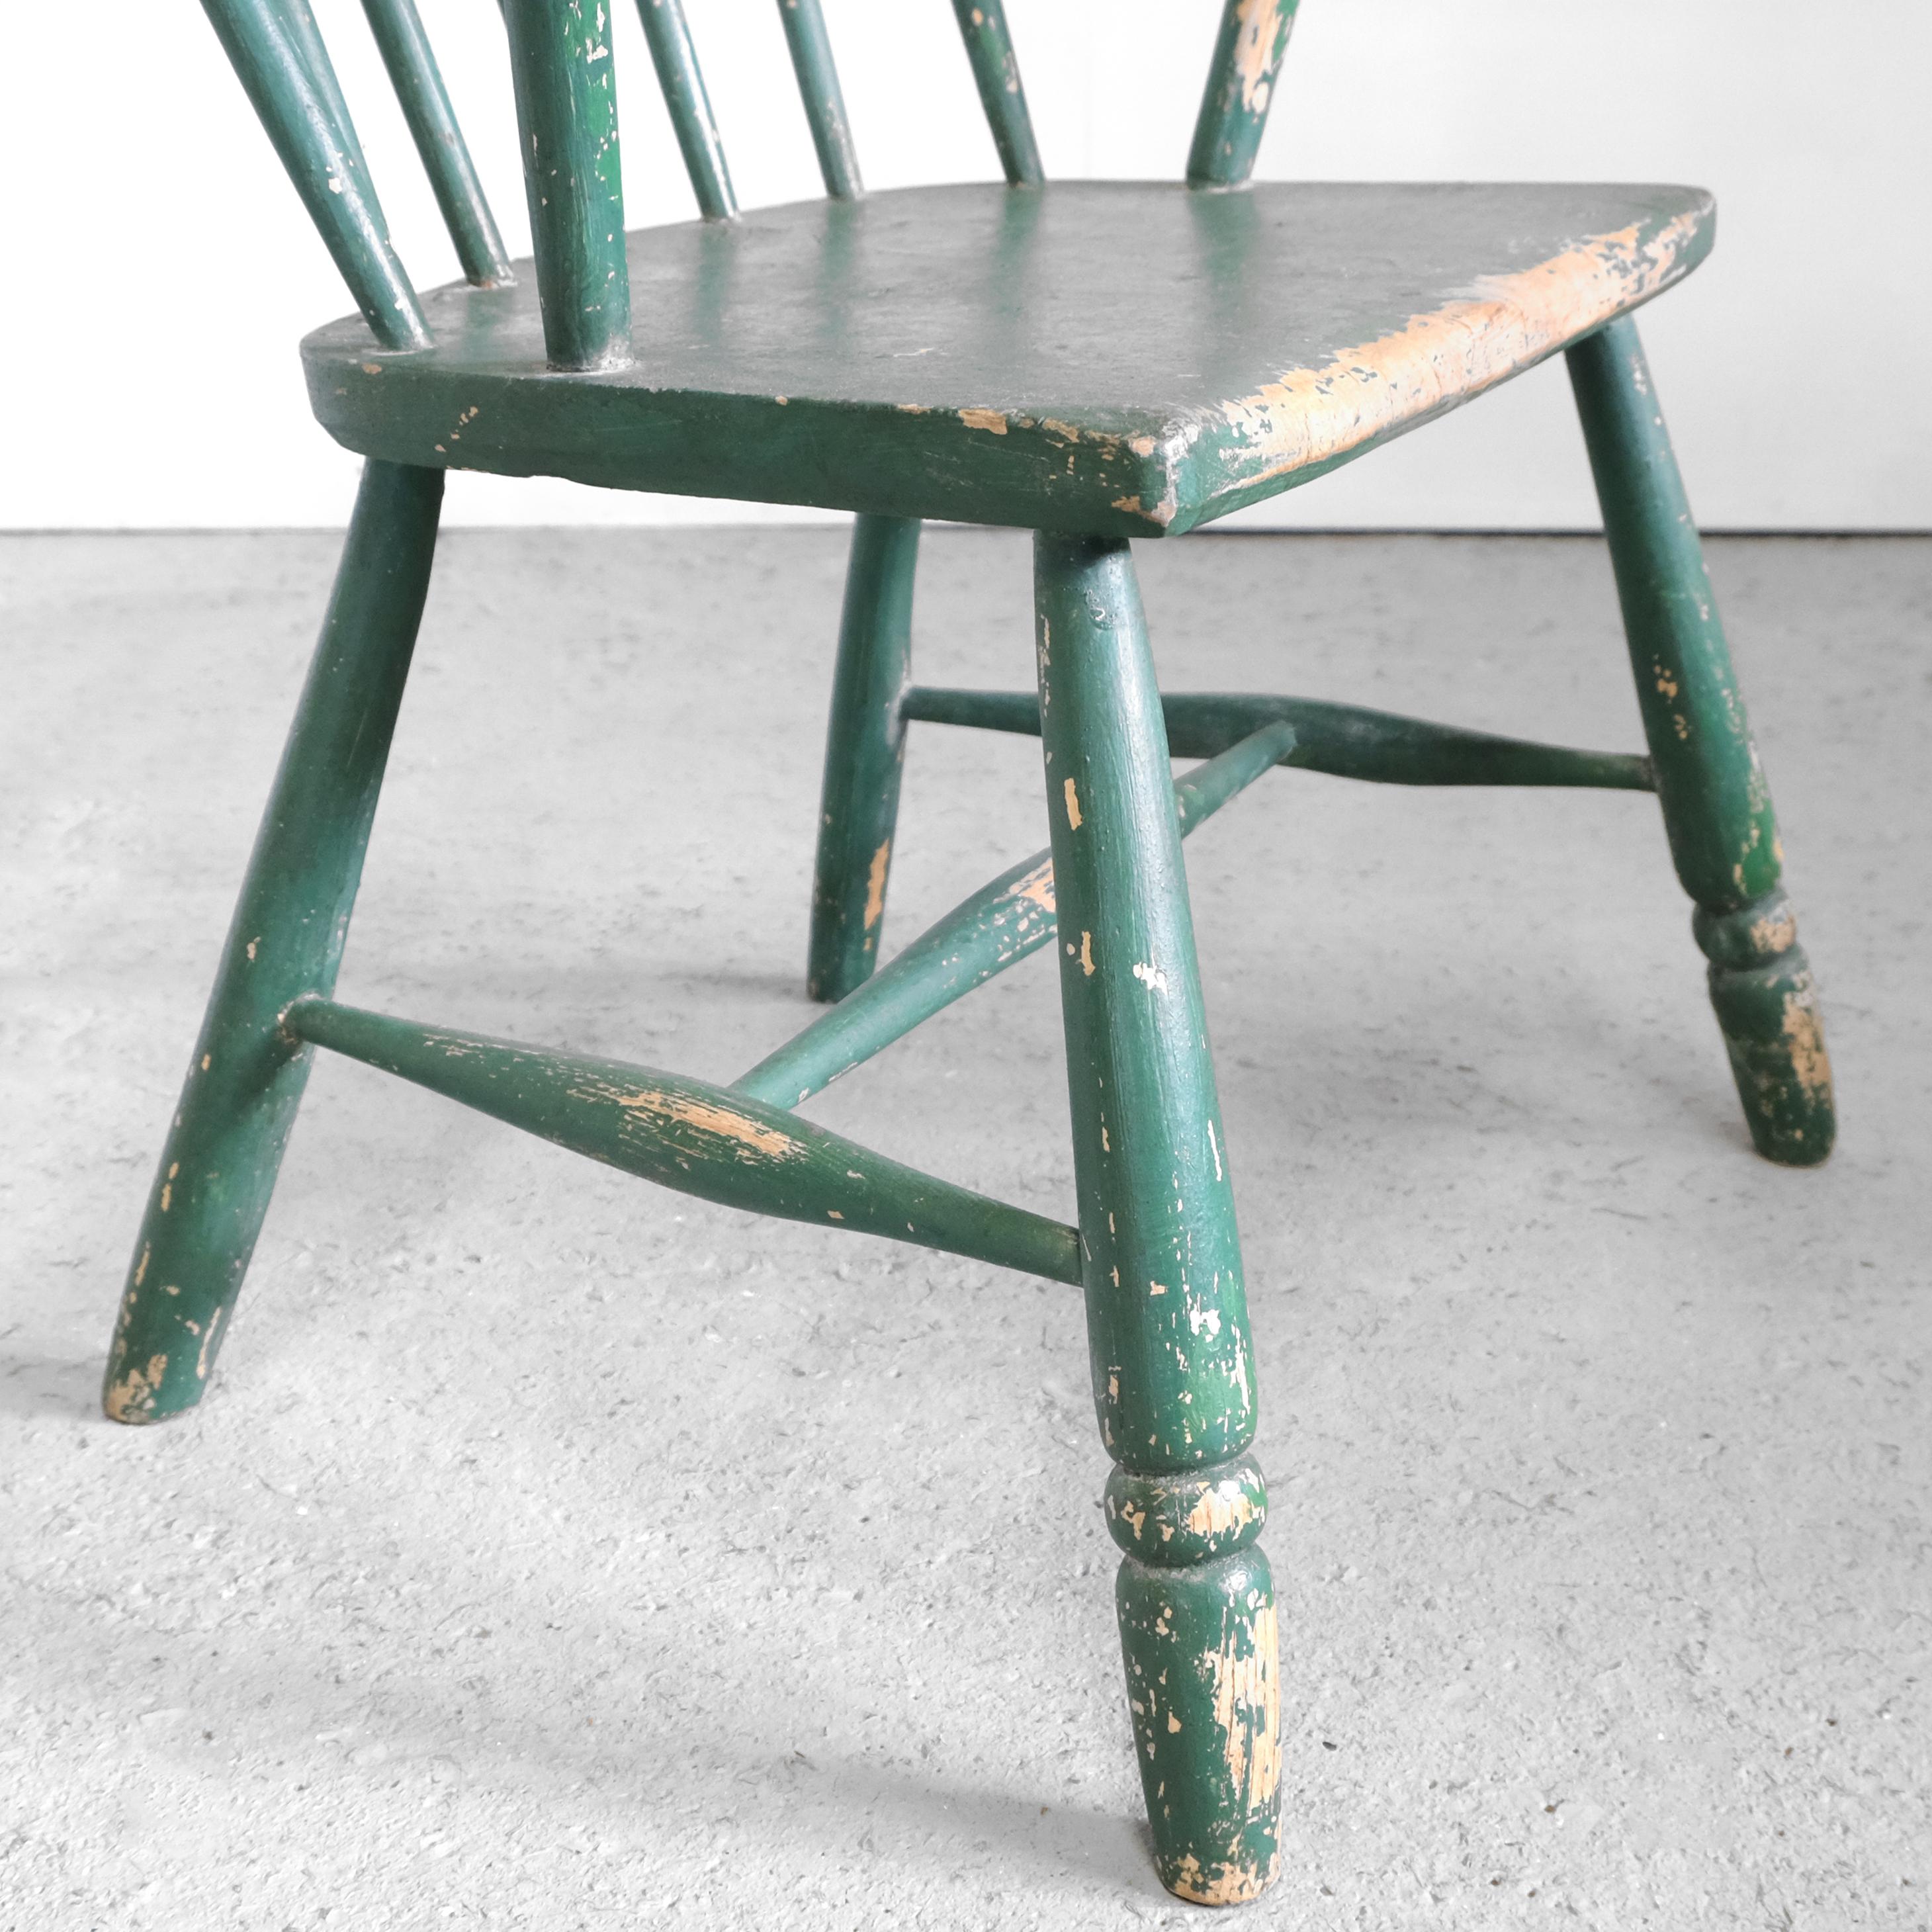 Ash Early 19th Century Painted English West Country Windsor Stick Chair in Green